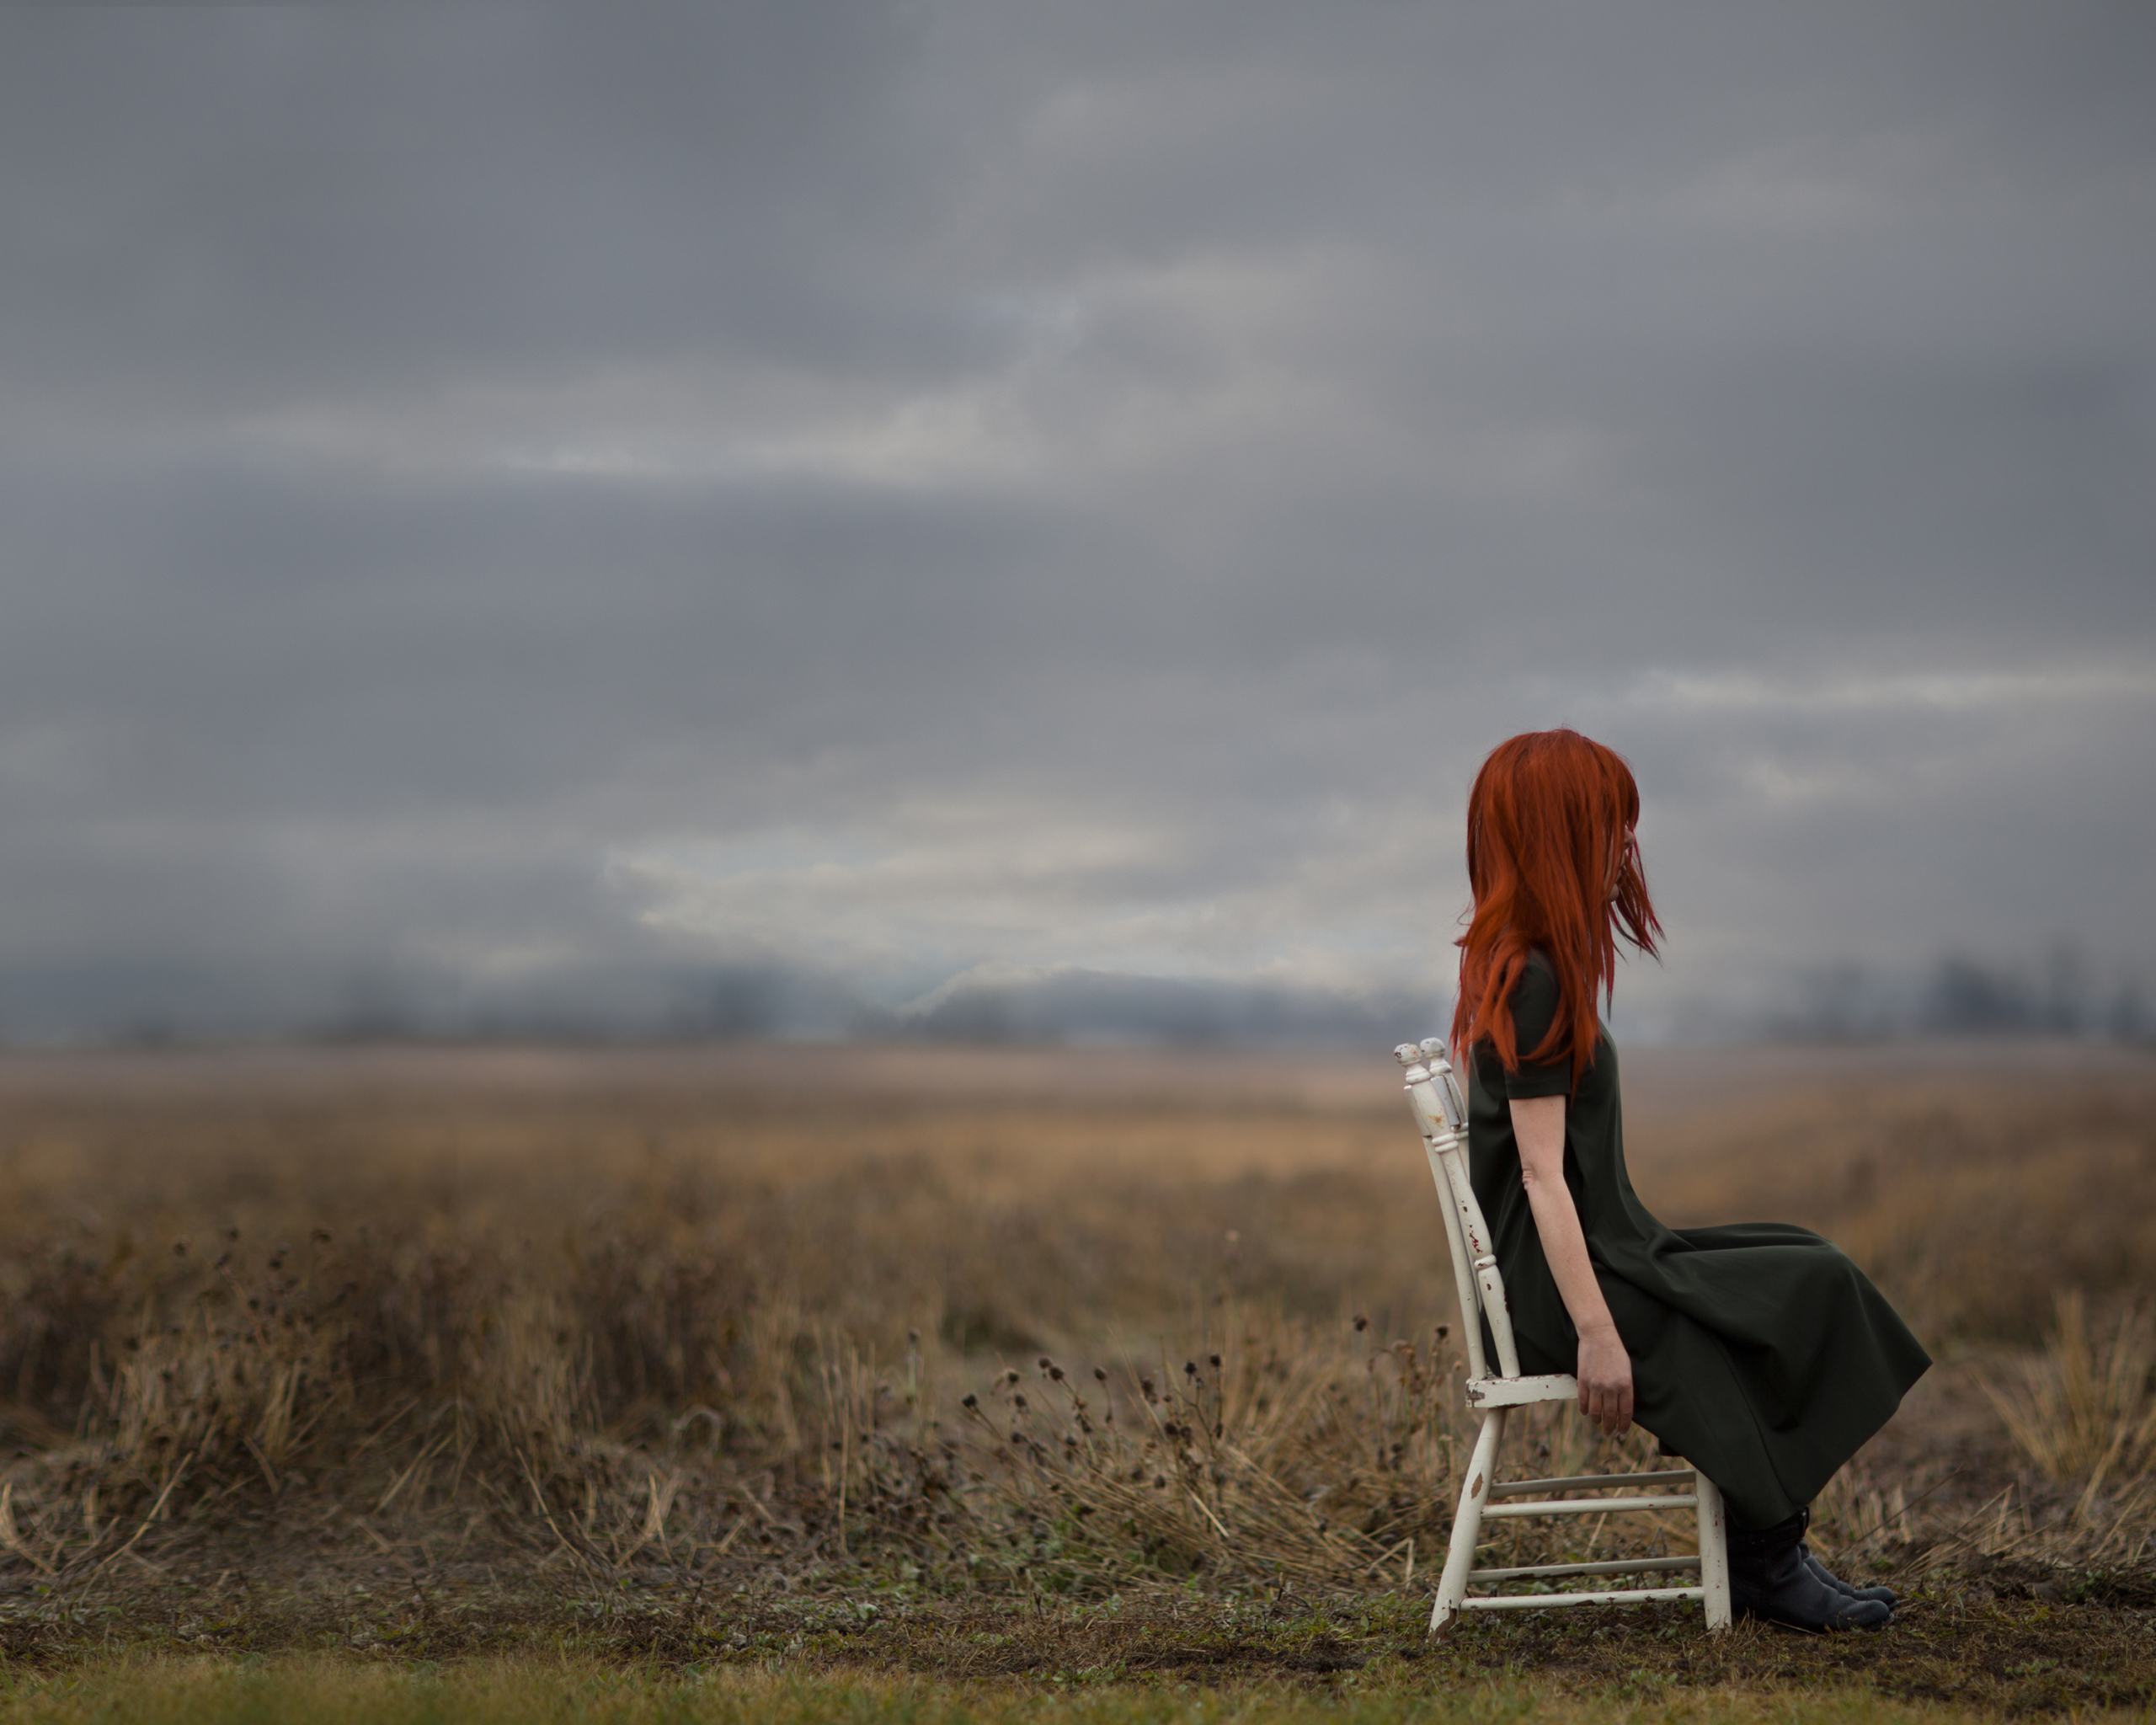     Patty Maher, Waiting for Godot, 2016.

